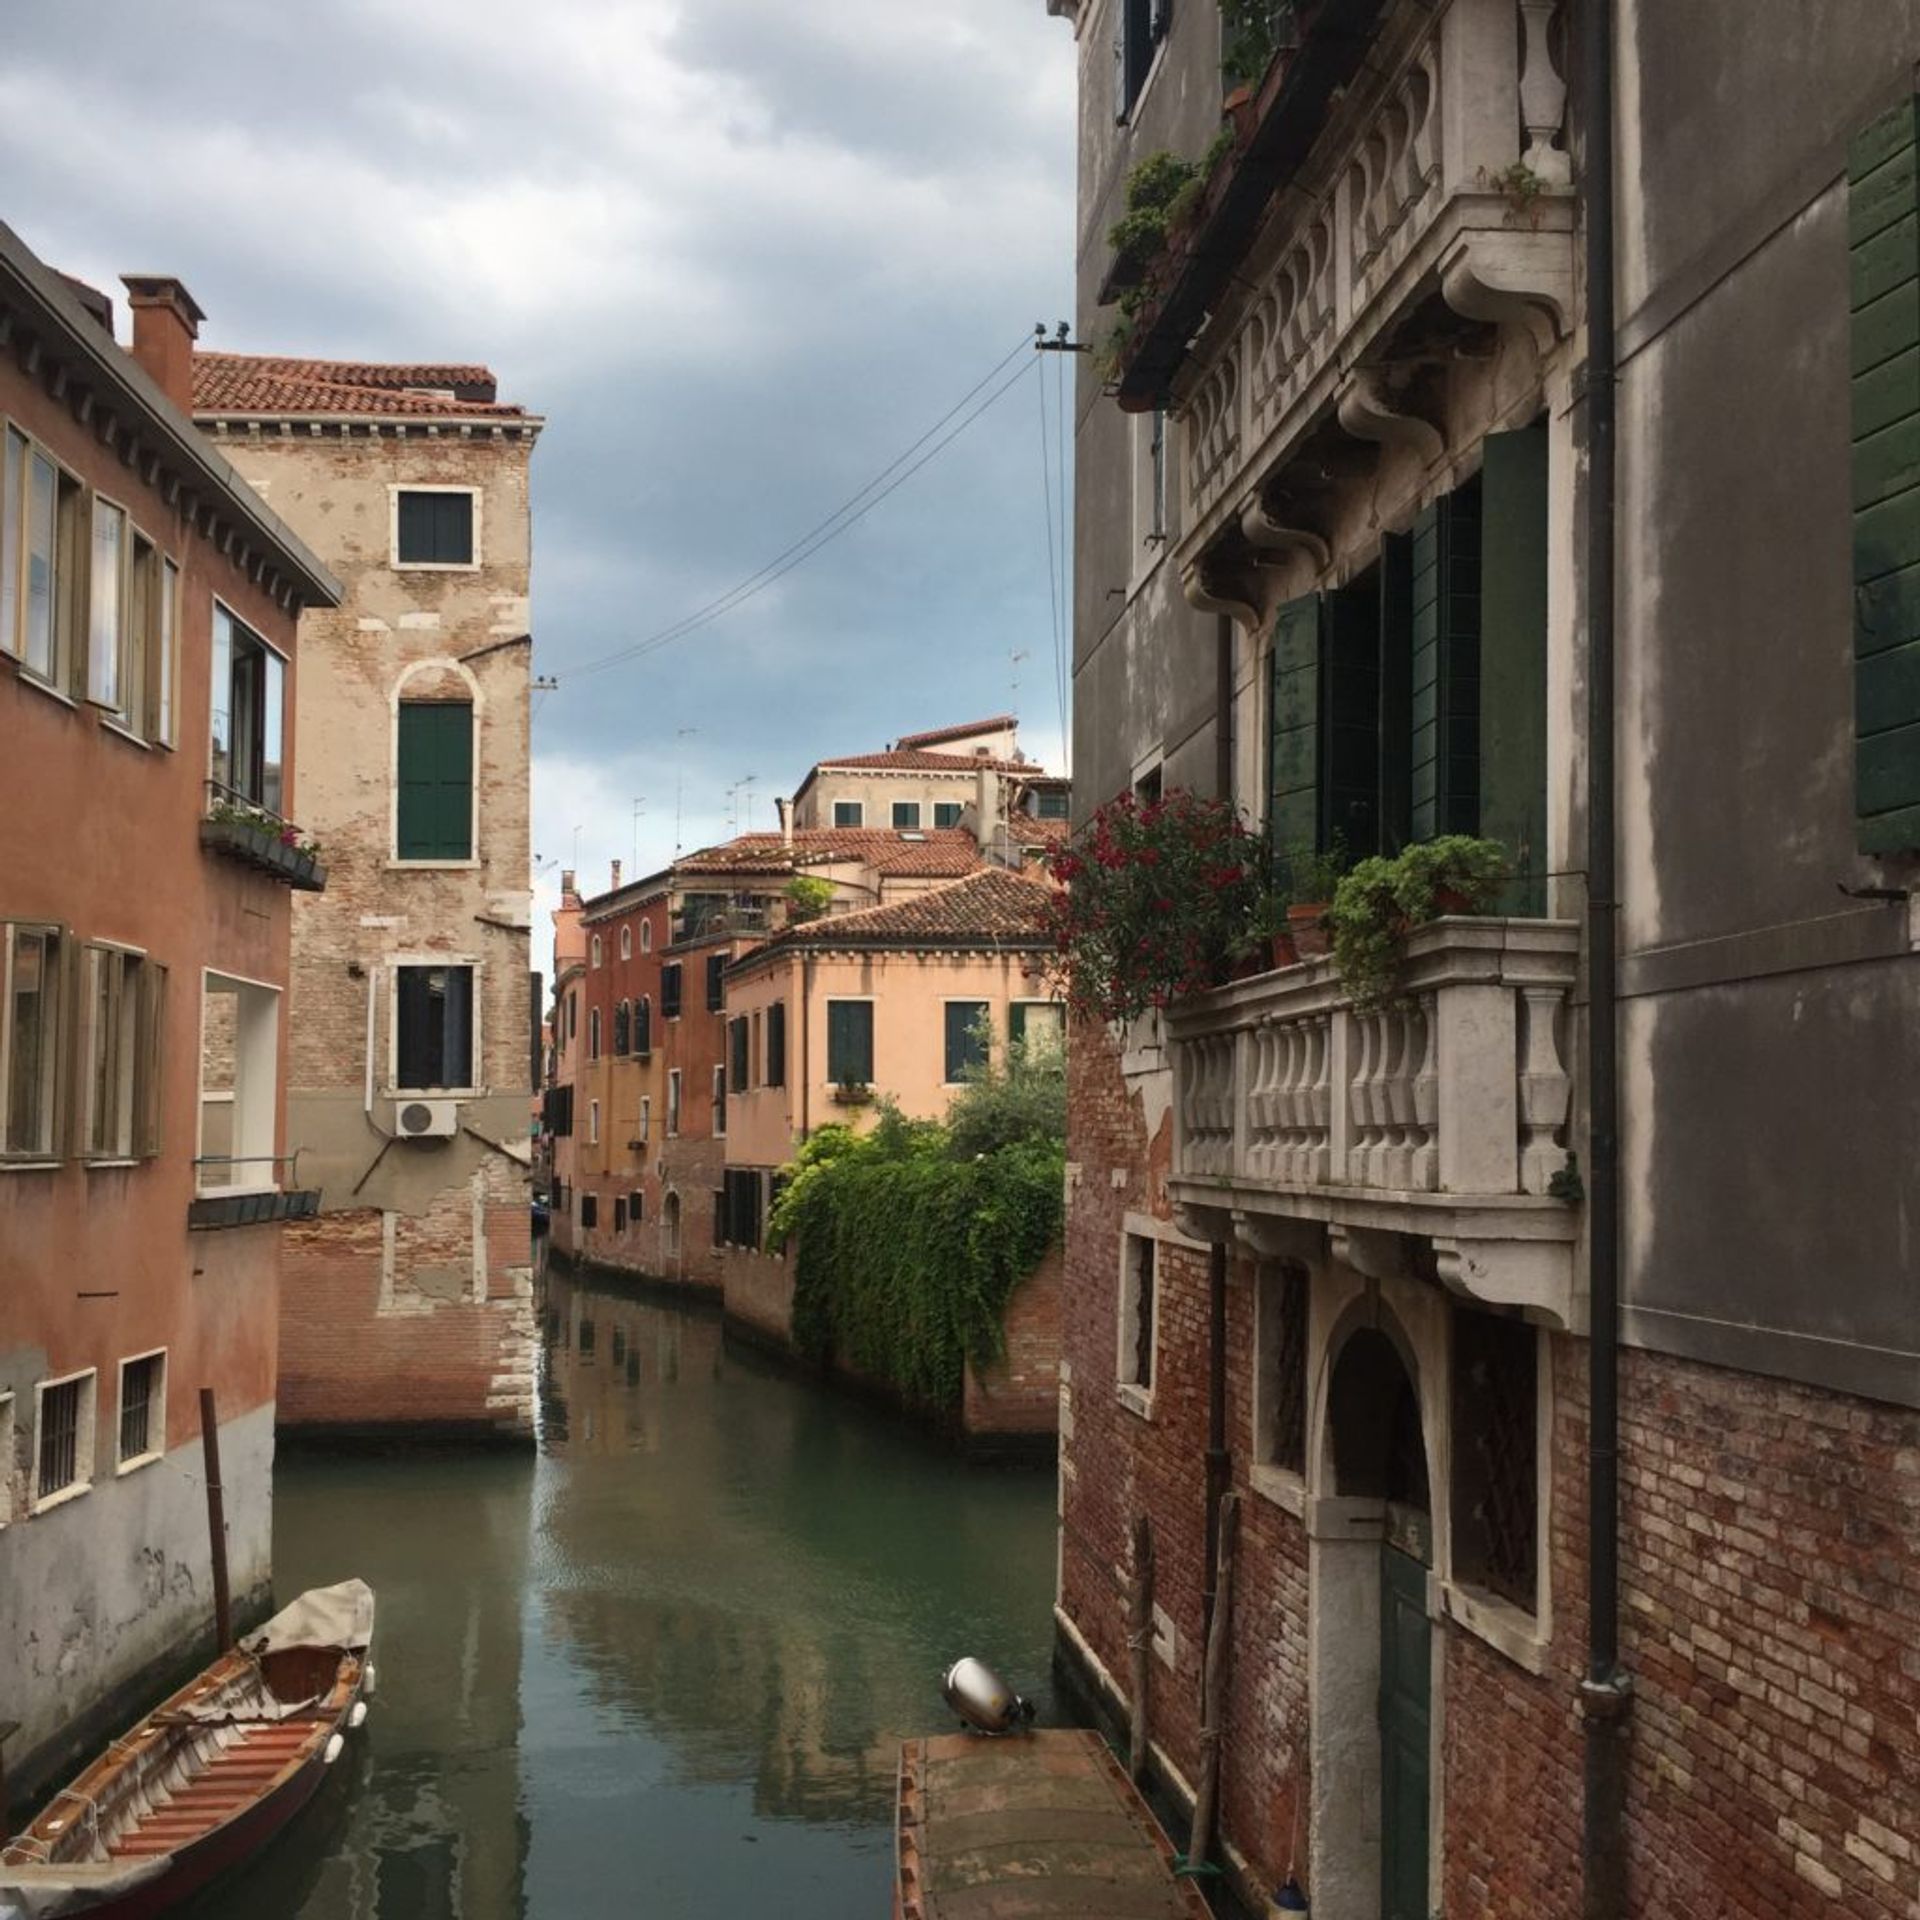 Water all up in the buildings' business, Venice in June 2018